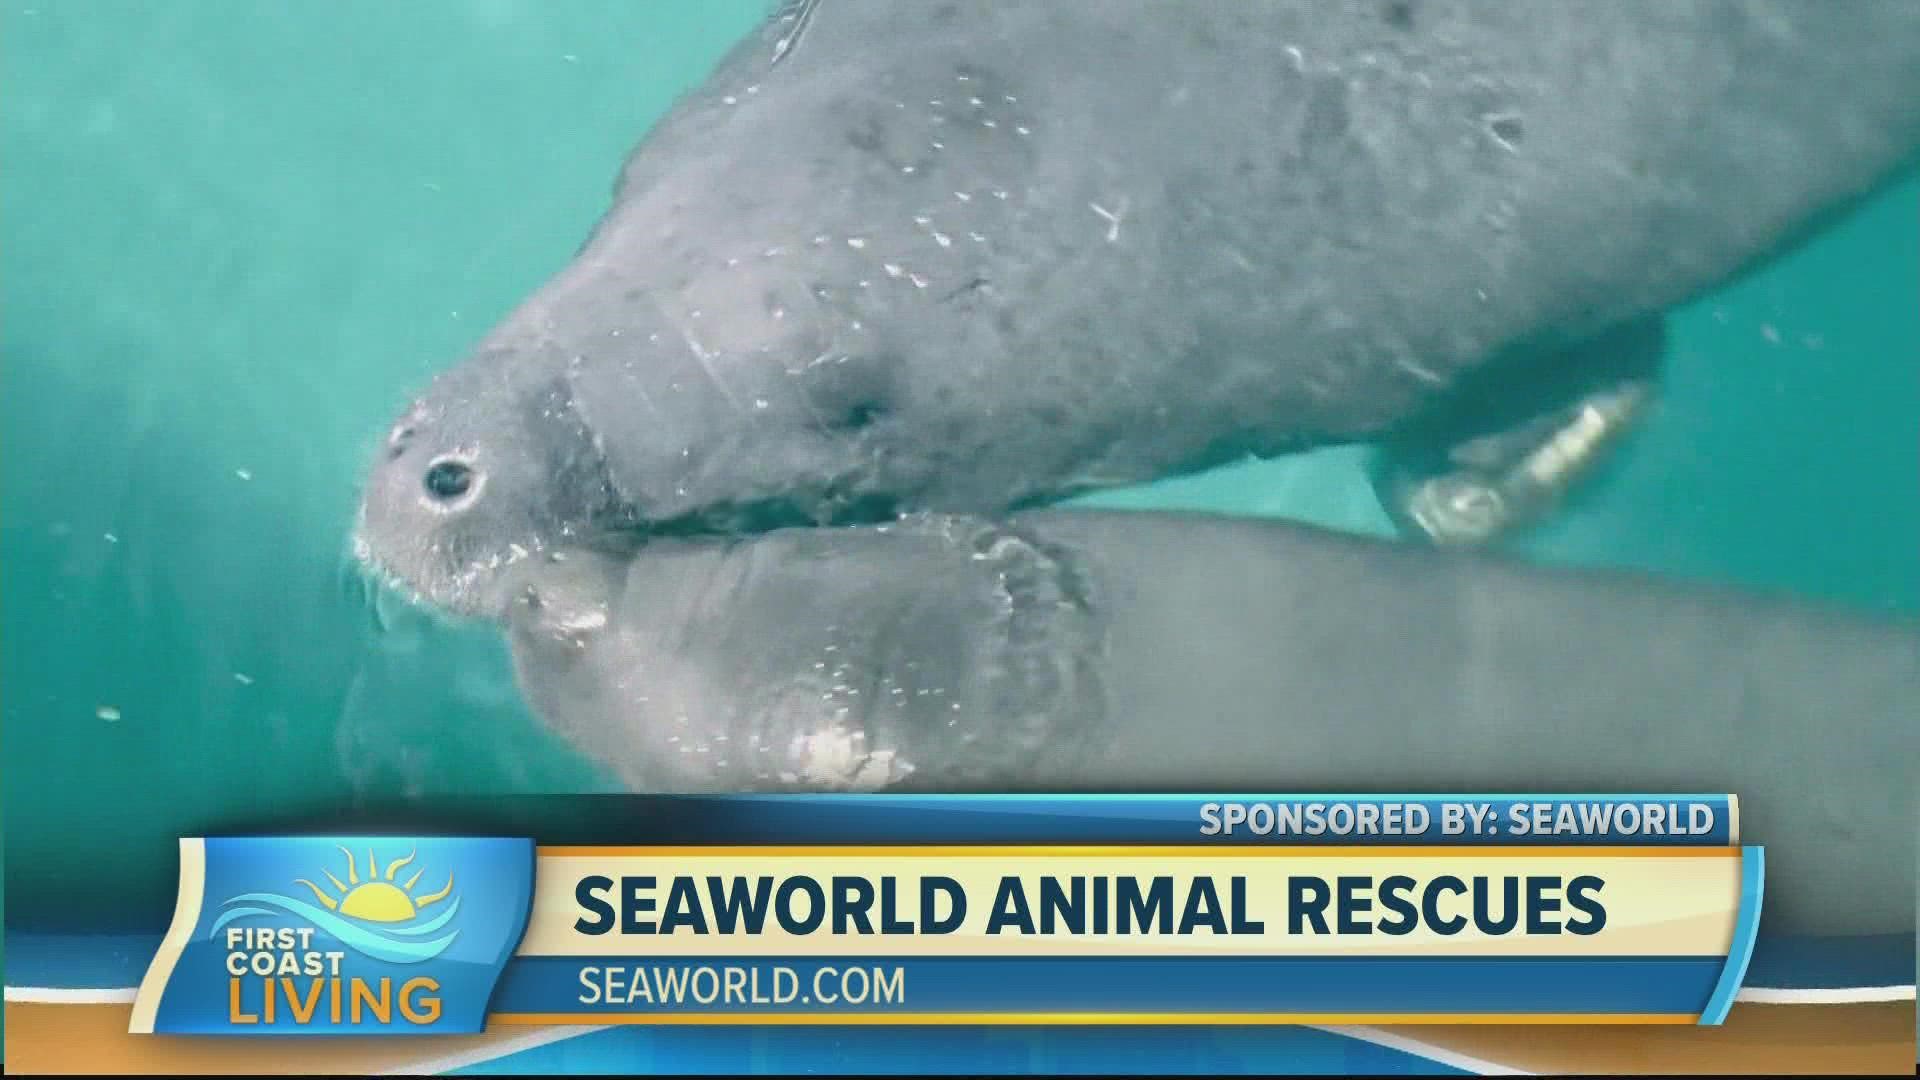 VP of Zoological Operations at SeaWorld, Jon Peterson discusses SeaWorld's rescue and rehabilitation efforts.